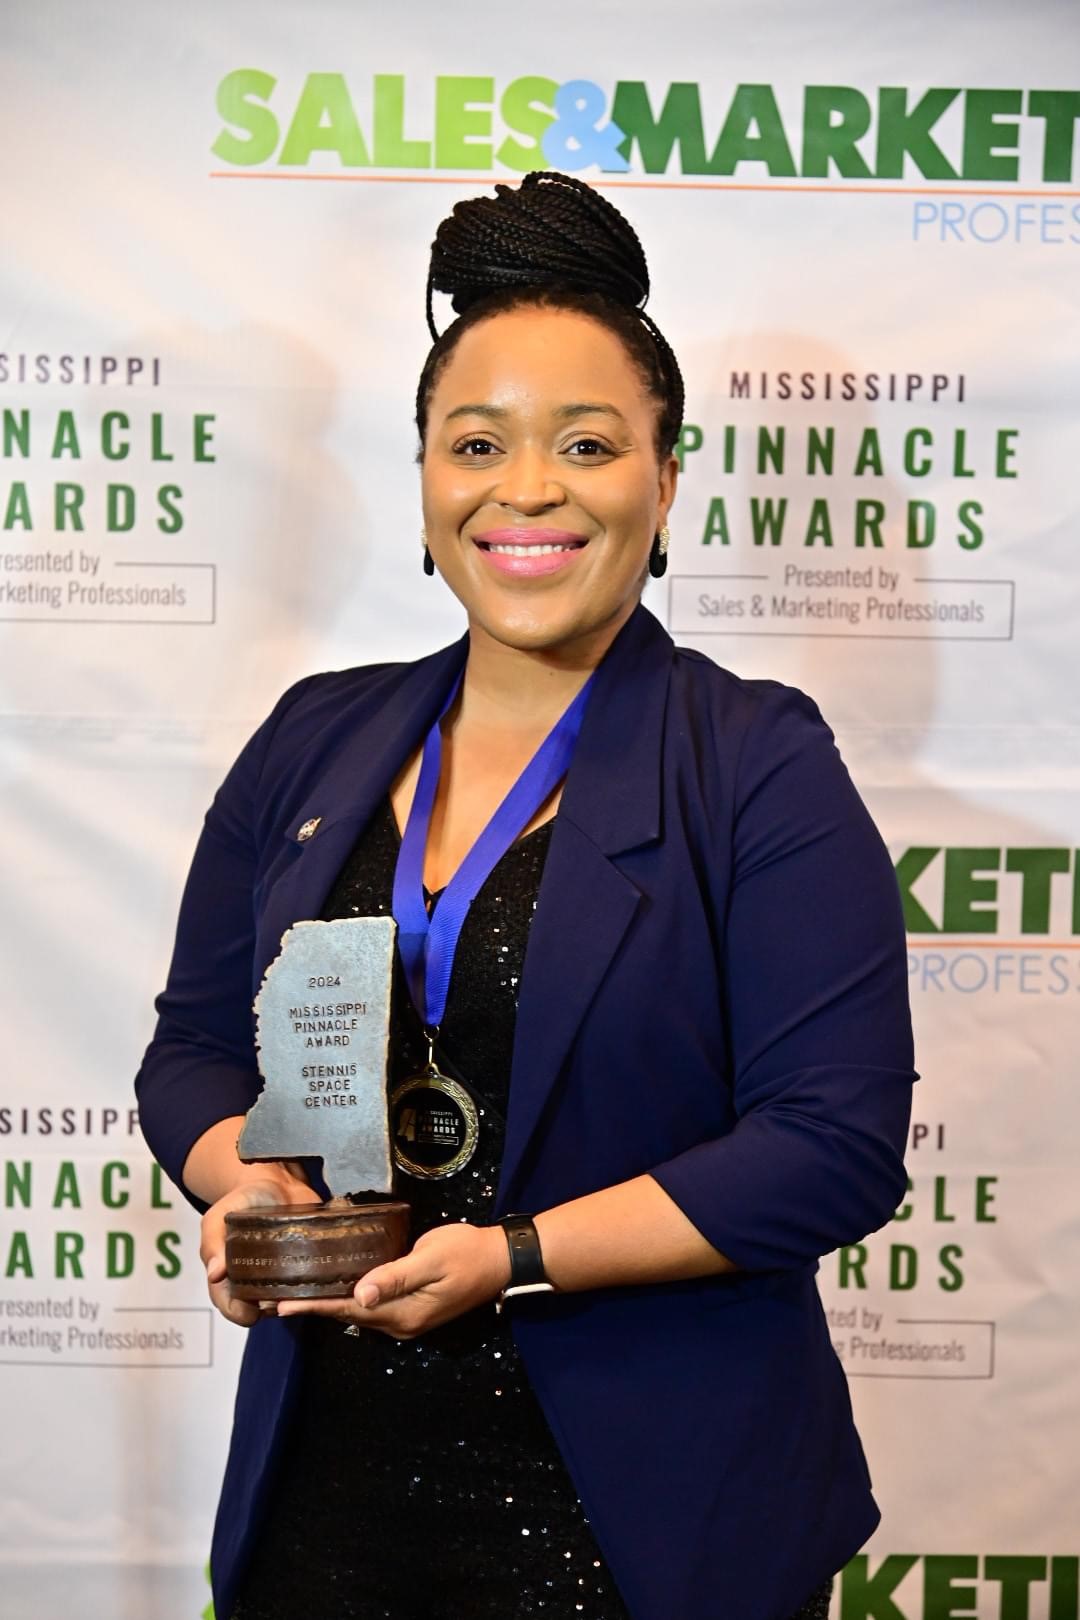 NASA Public Affairs Specialist Samone Wilson, wearing a black jacket, holds a Pinnacle Award while smiling at the camera.